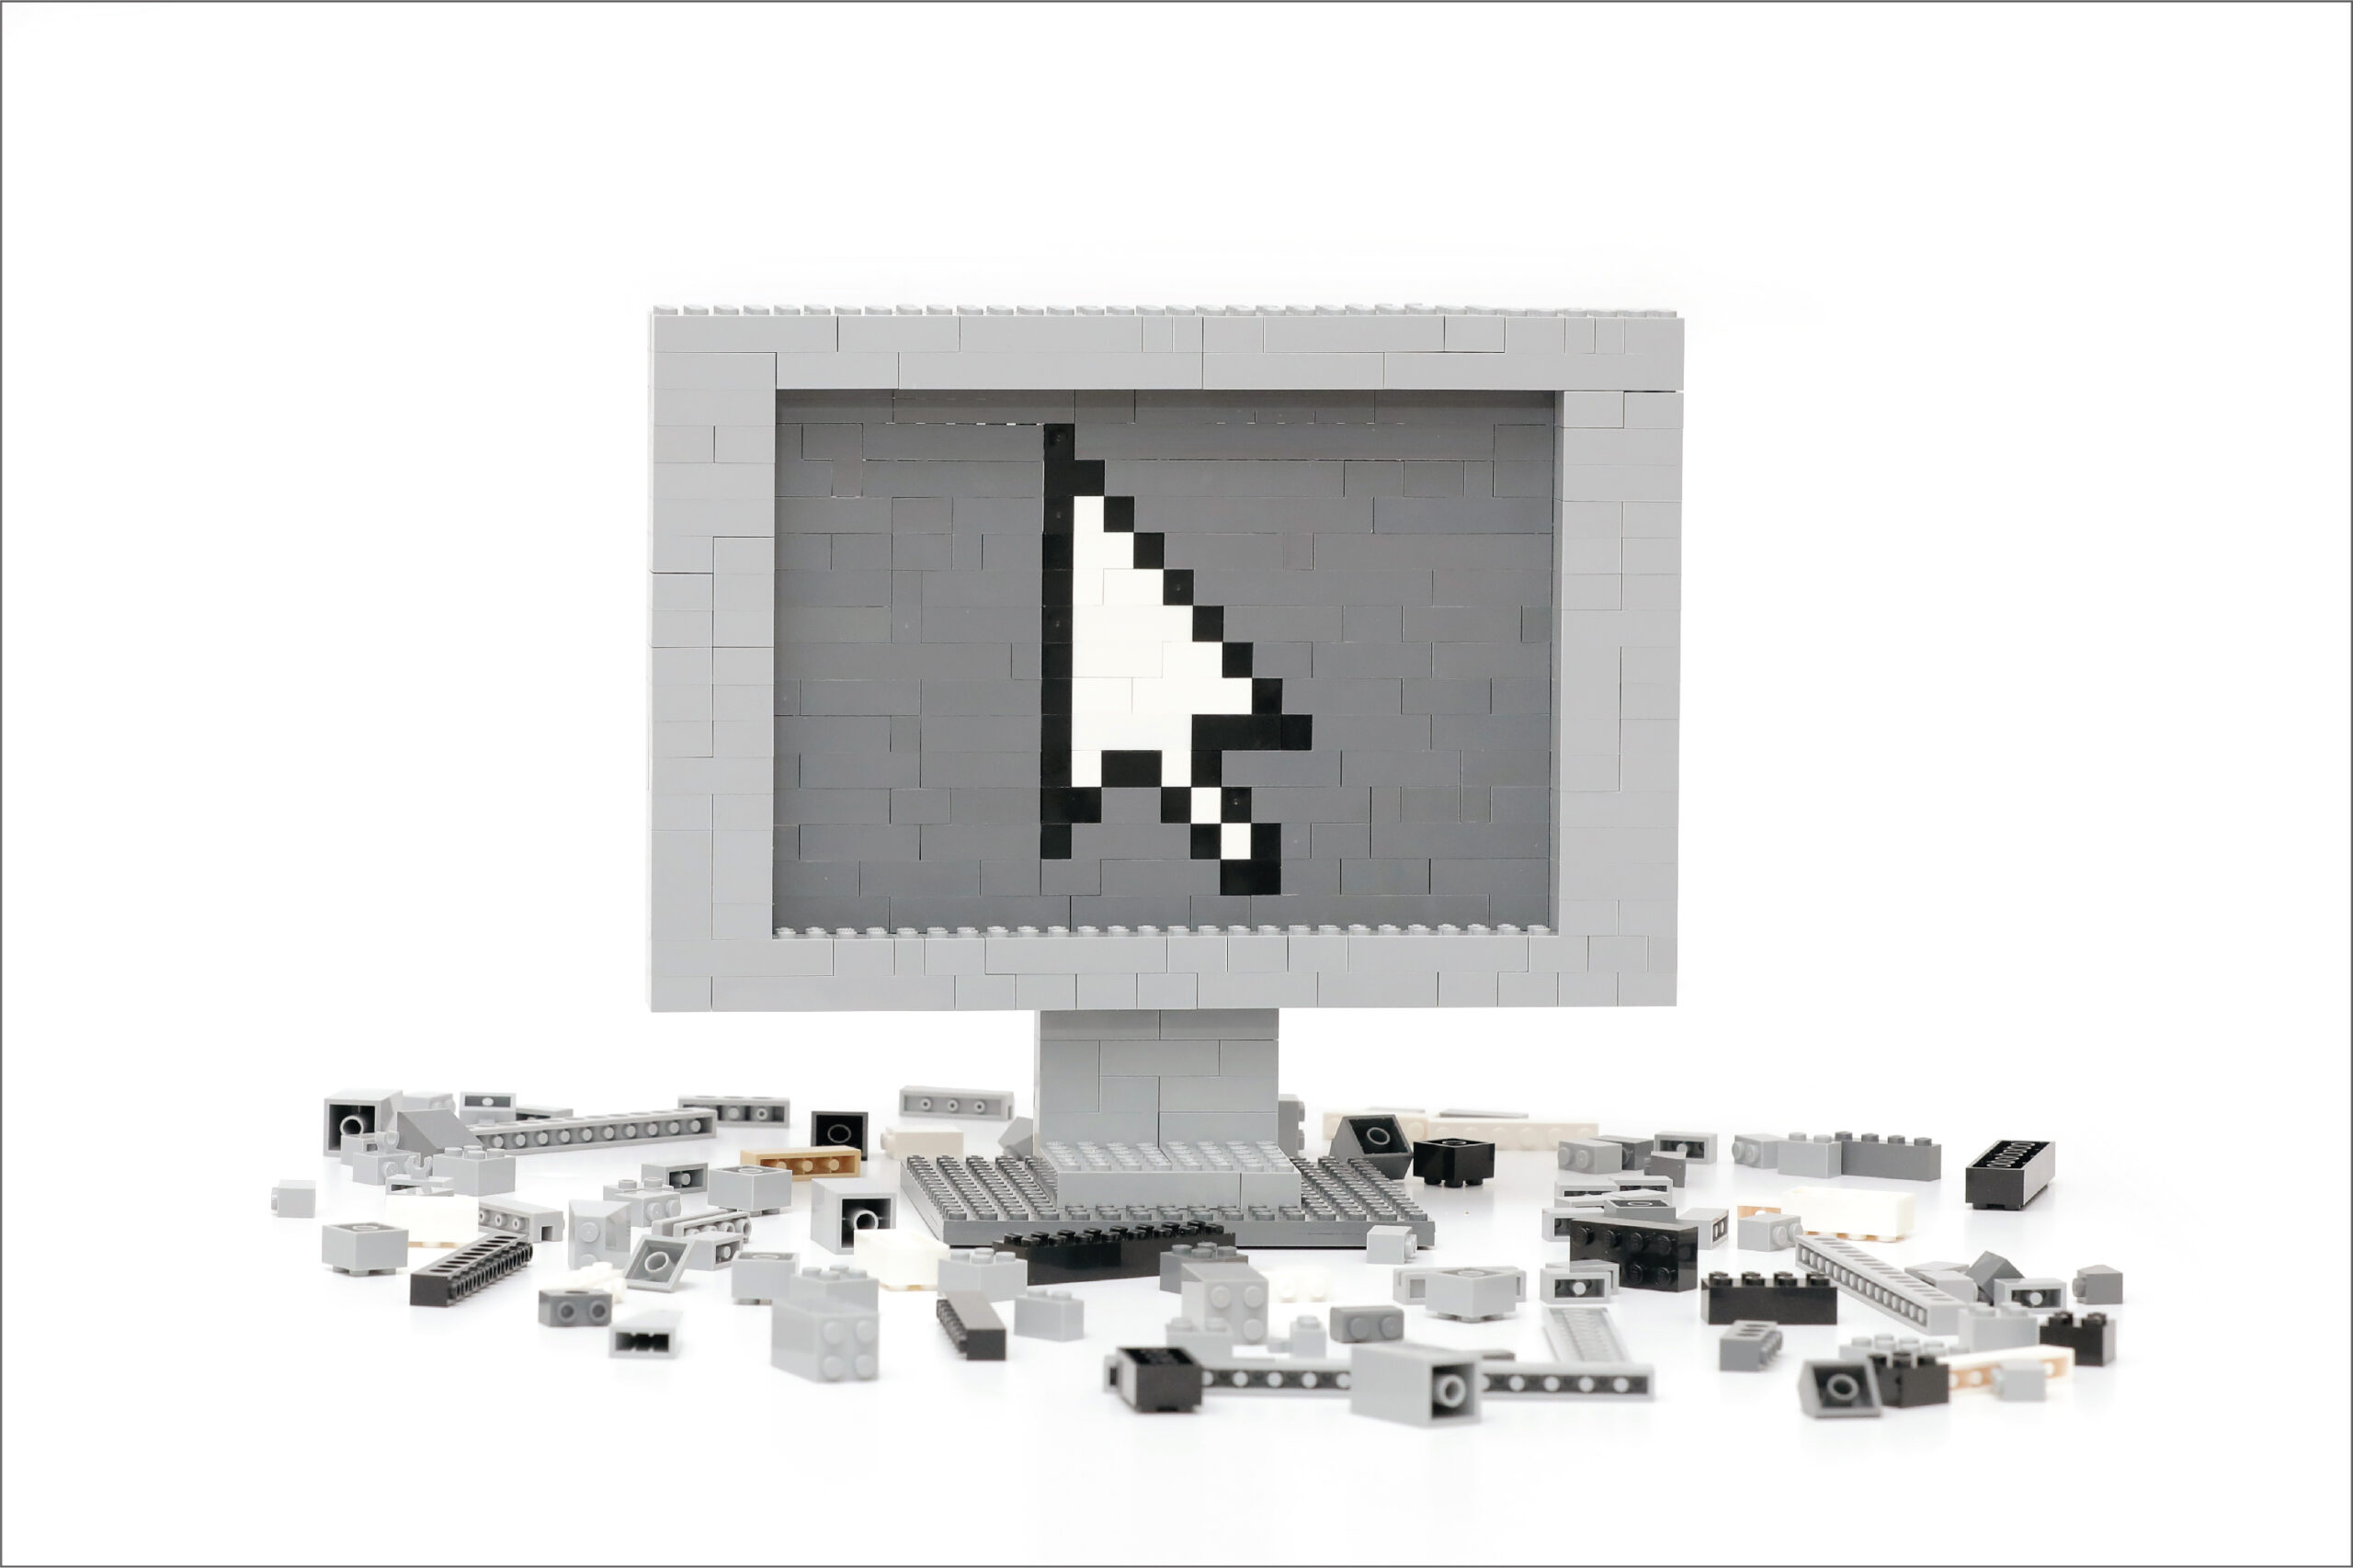 Photo of a computer screen made from lego.